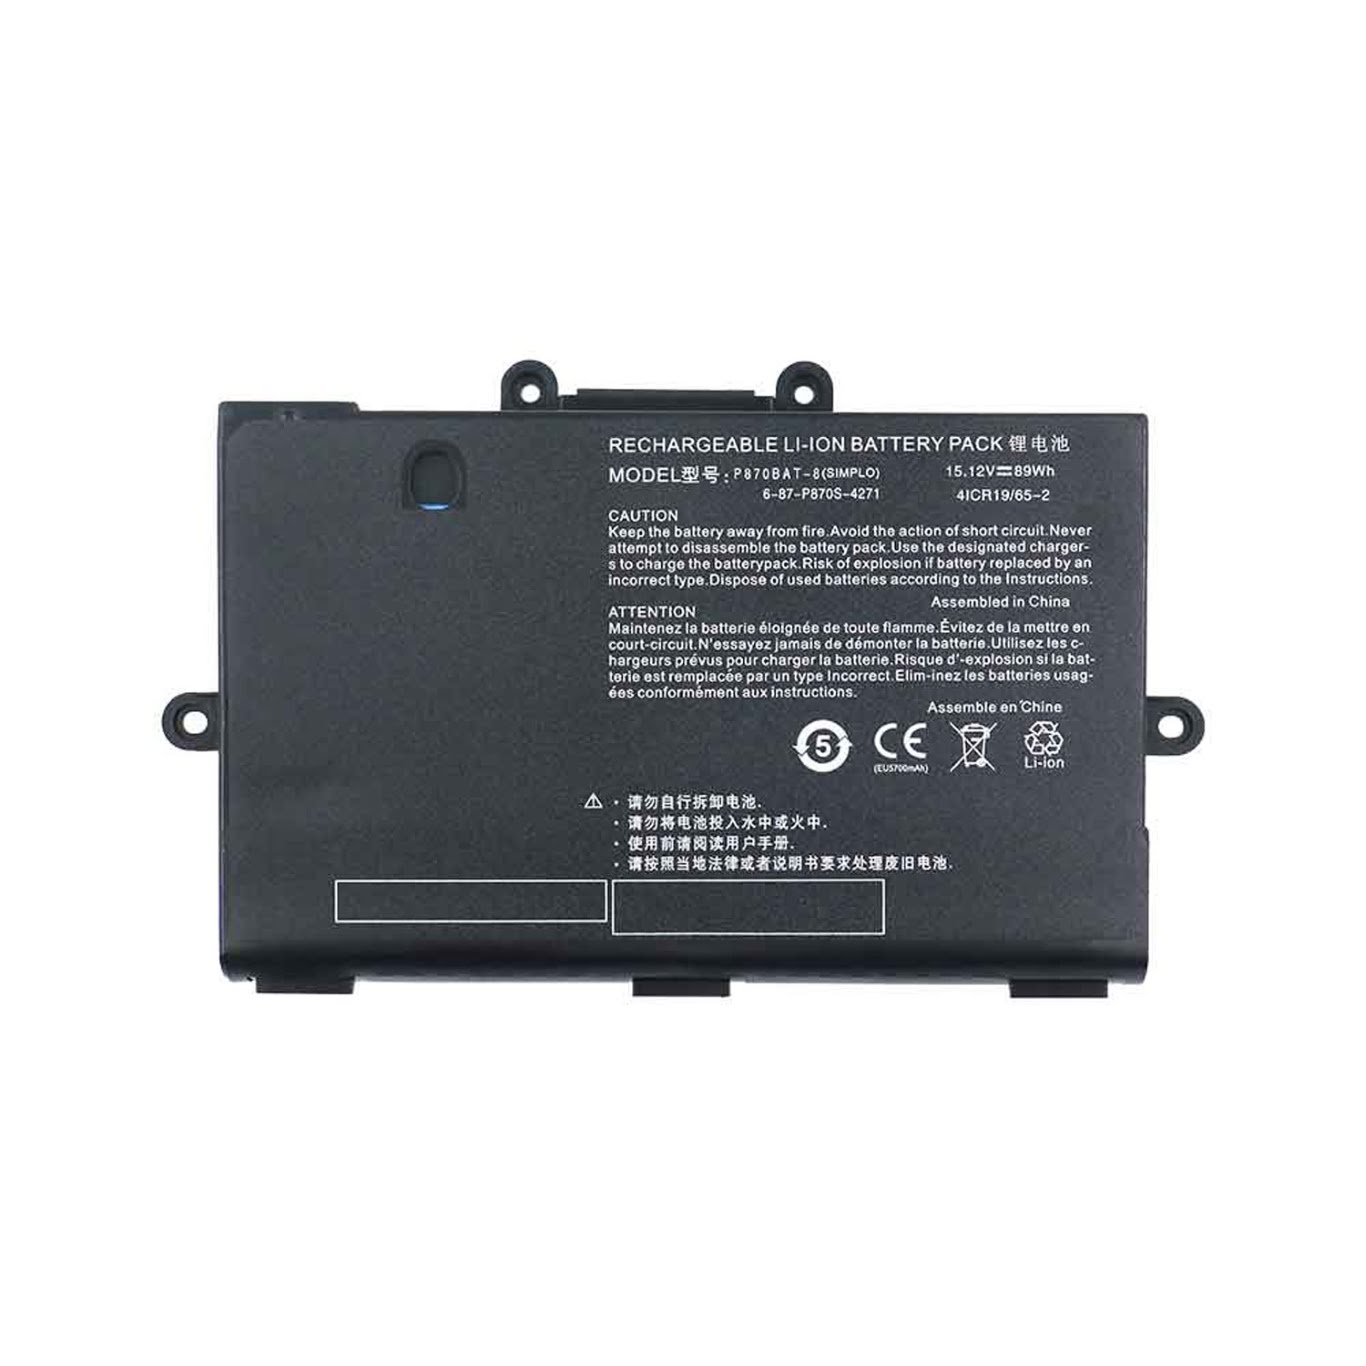 6-87-P870S-4271, 6-87-P870S-4272 replacement Laptop Battery for Clevo P775DM3, P8700S, 15.12v, 89wh